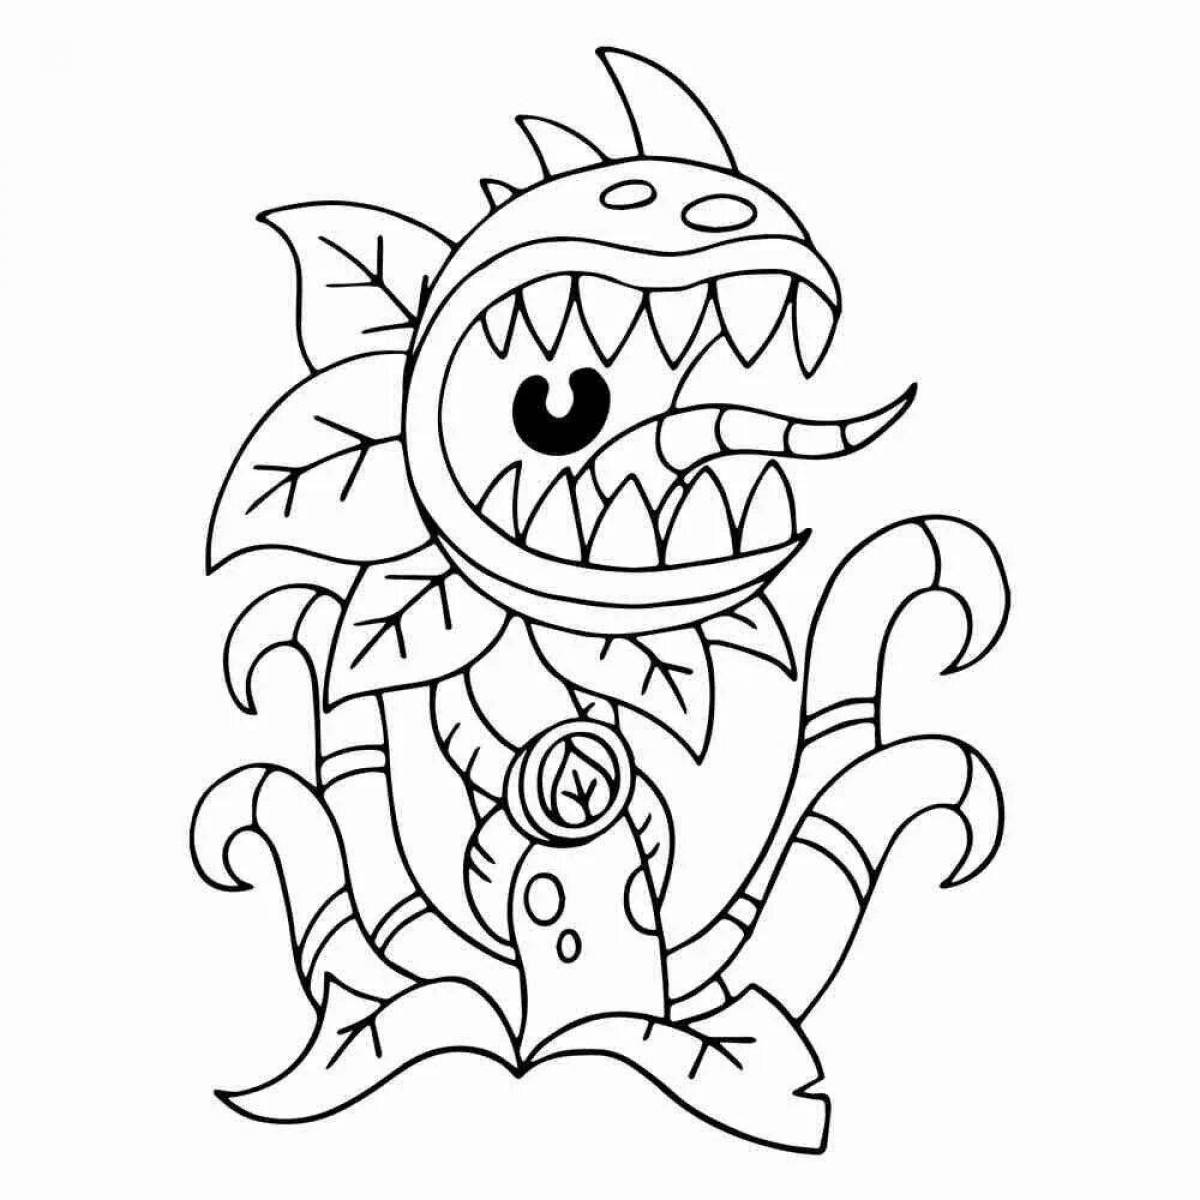 Inspirational coloring pages plants vs zombies all plants